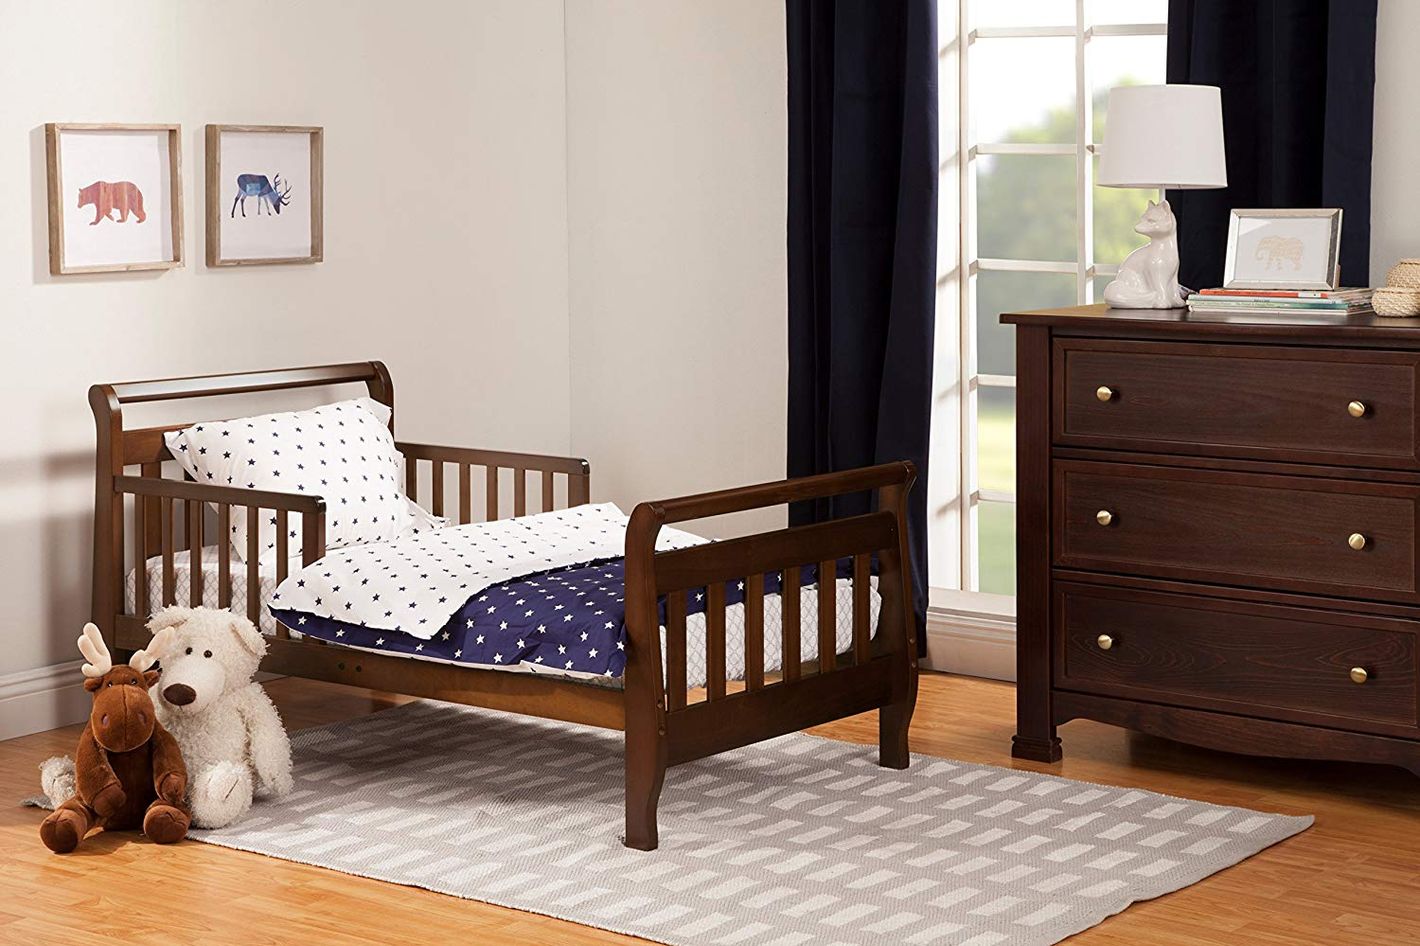 10 Best Toddler Beds 2019 The, Is A Toddler Bed Smaller Than A Twin